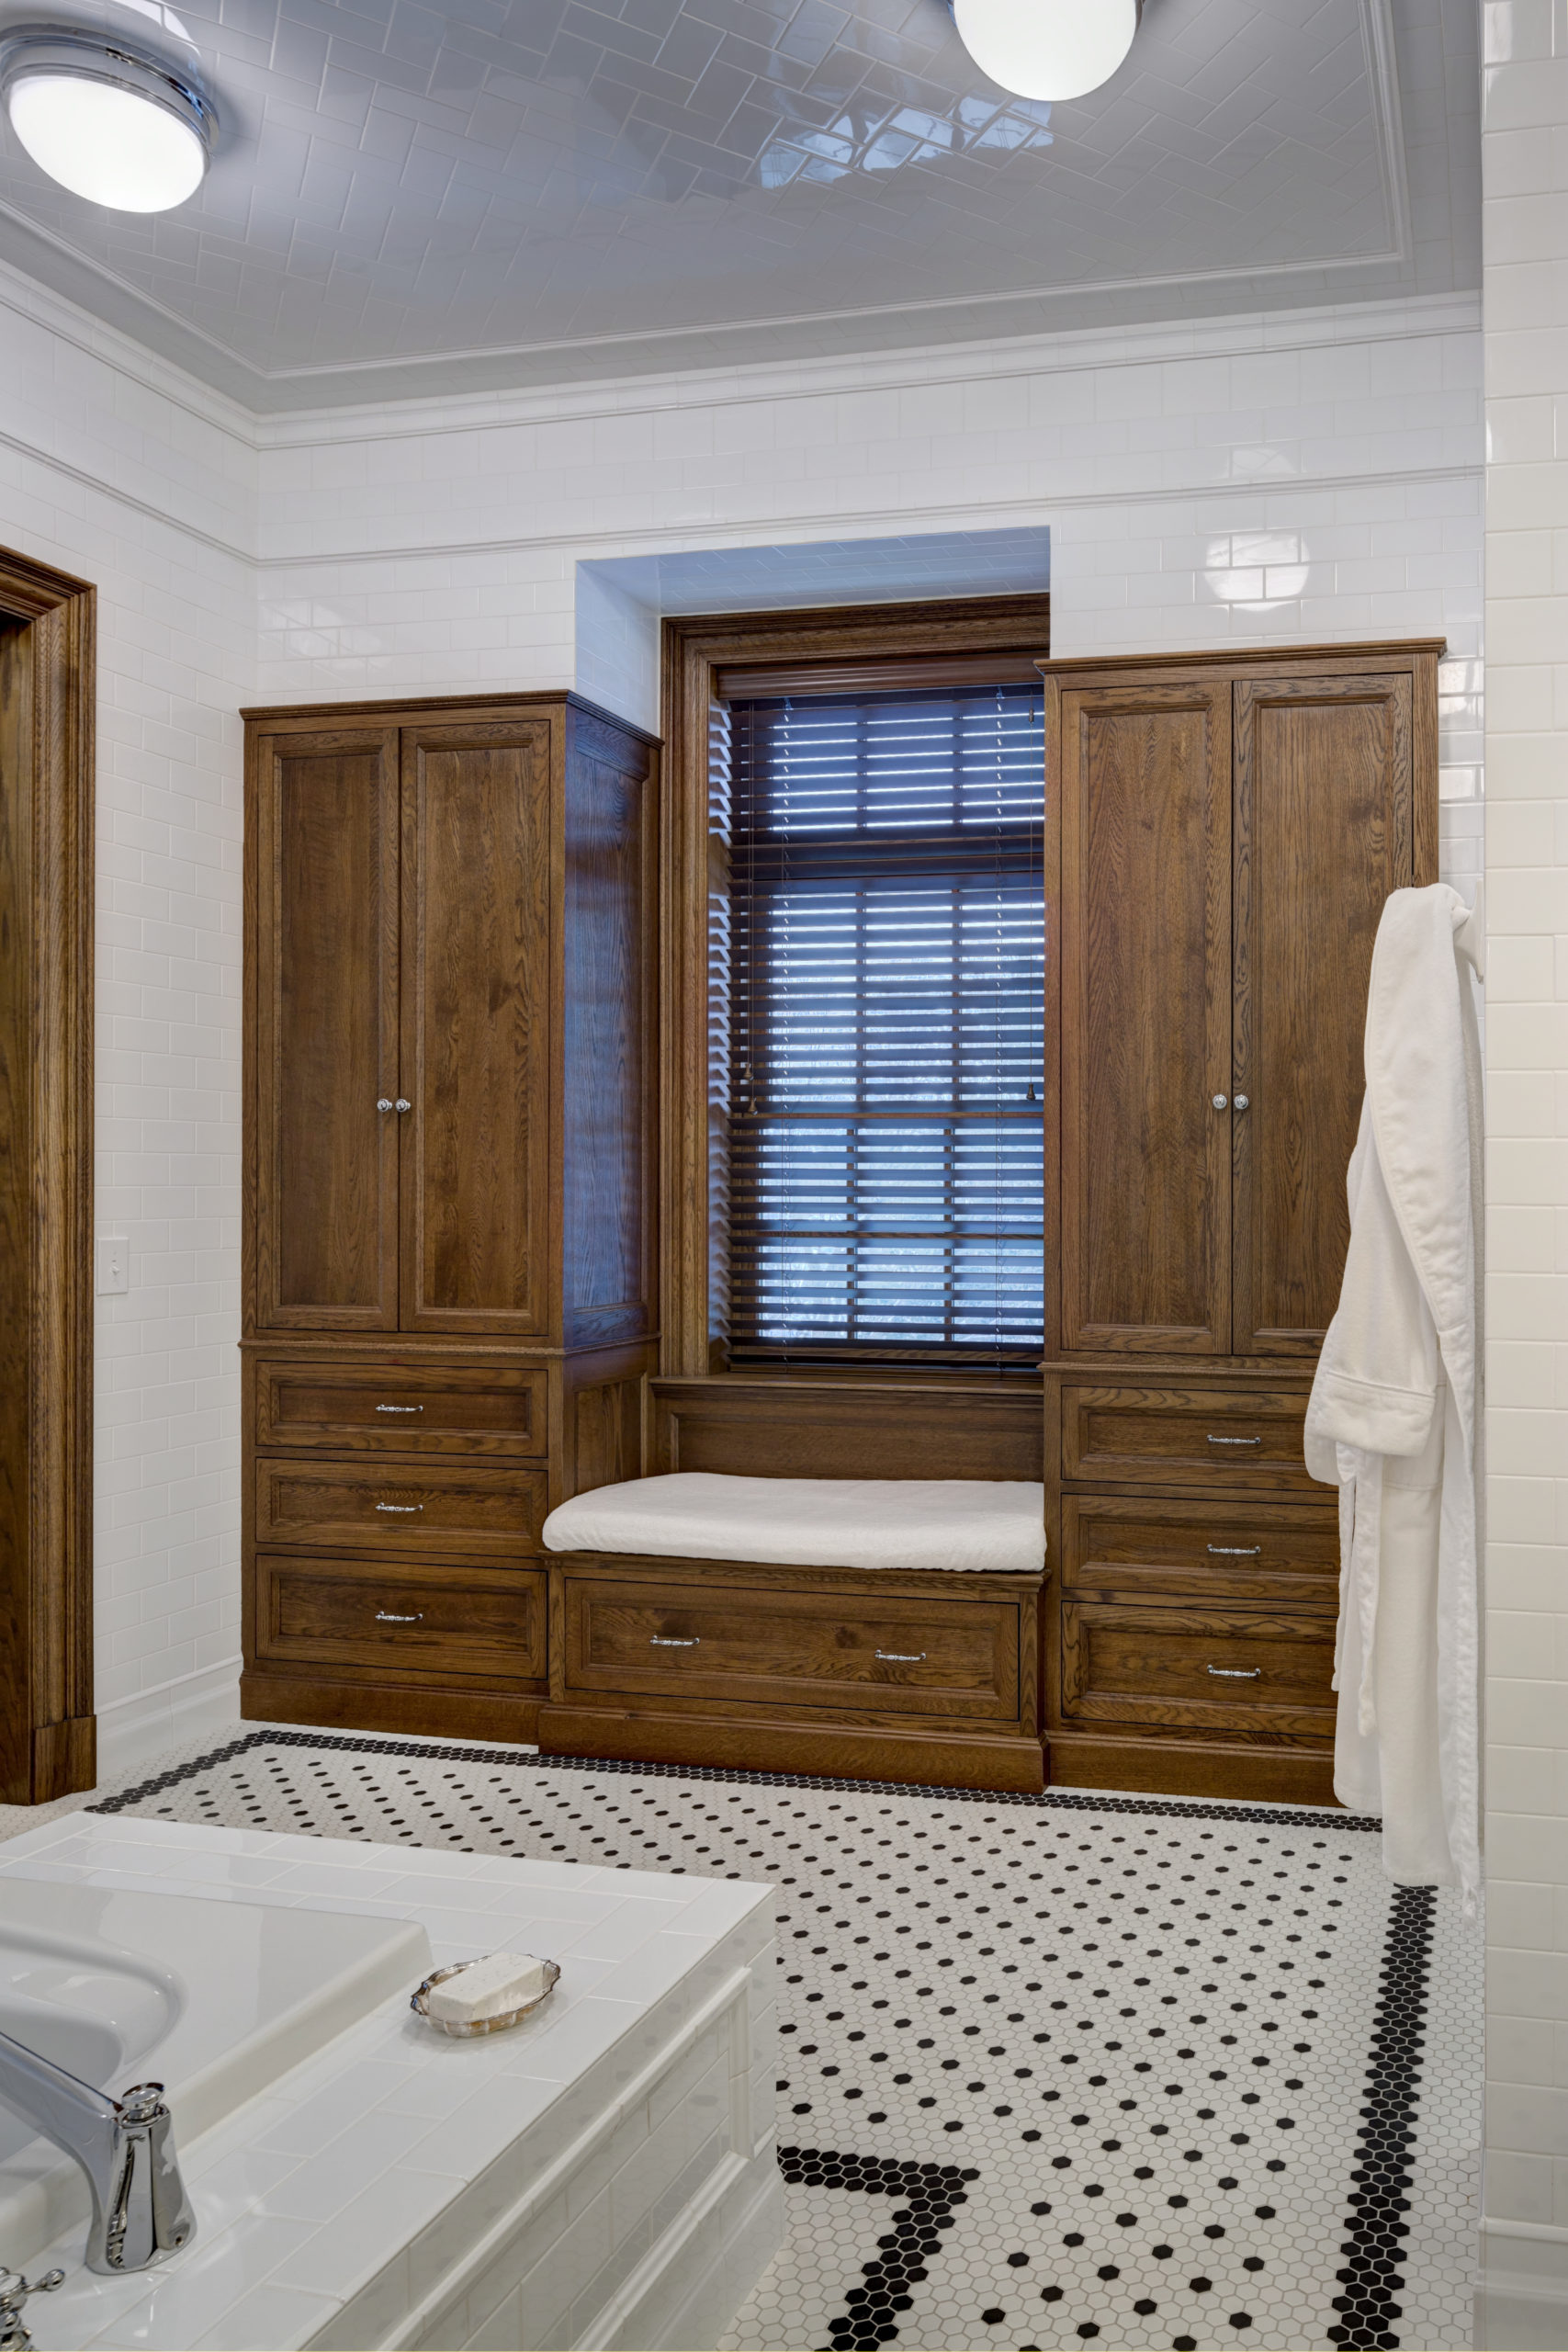 Bathroom closets with window bench seat